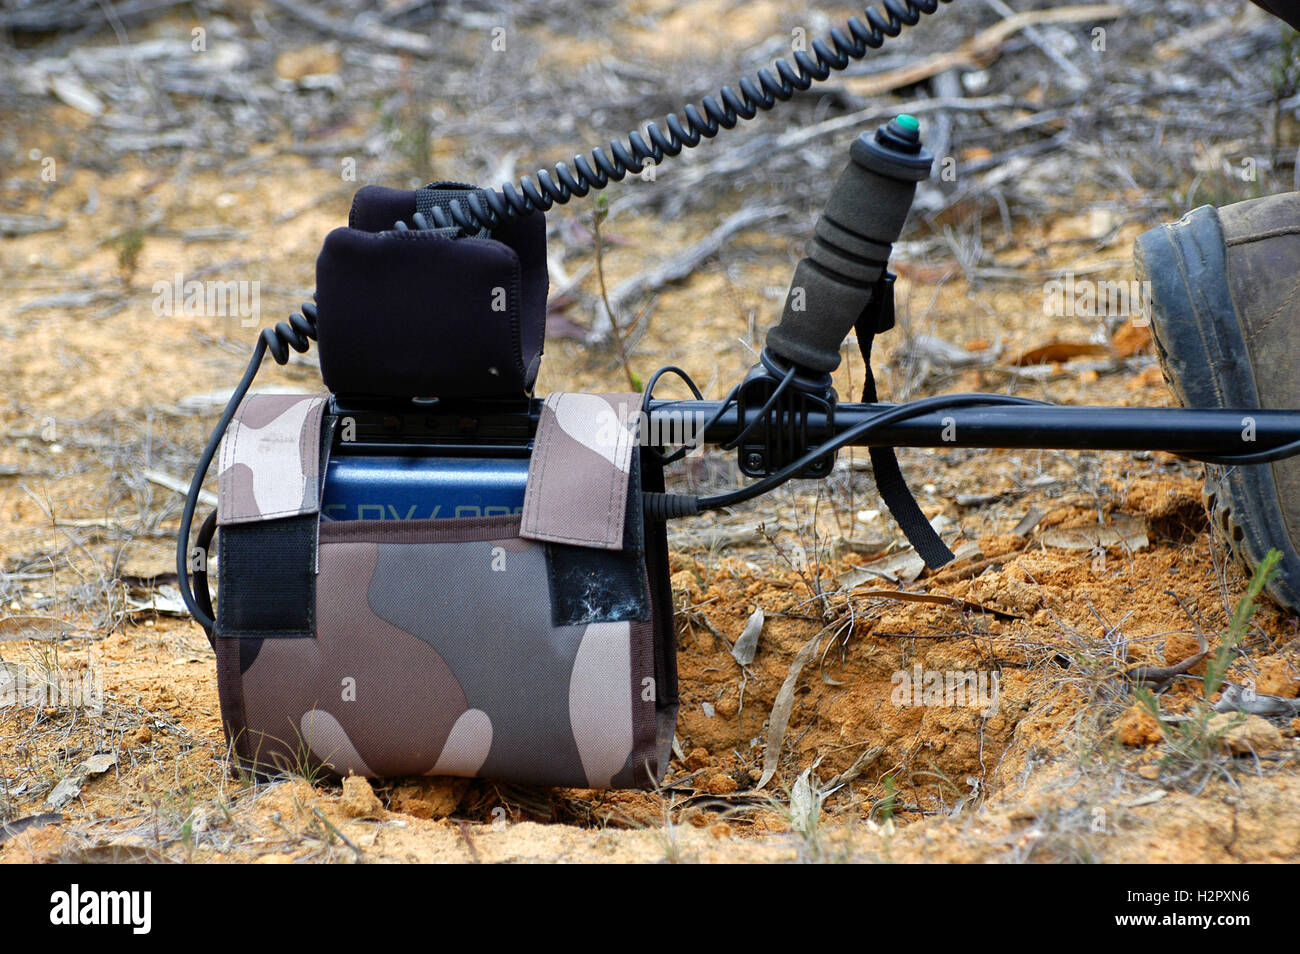 Metal detector used to search for gold nuggets in Australia Stock Photo -  Alamy